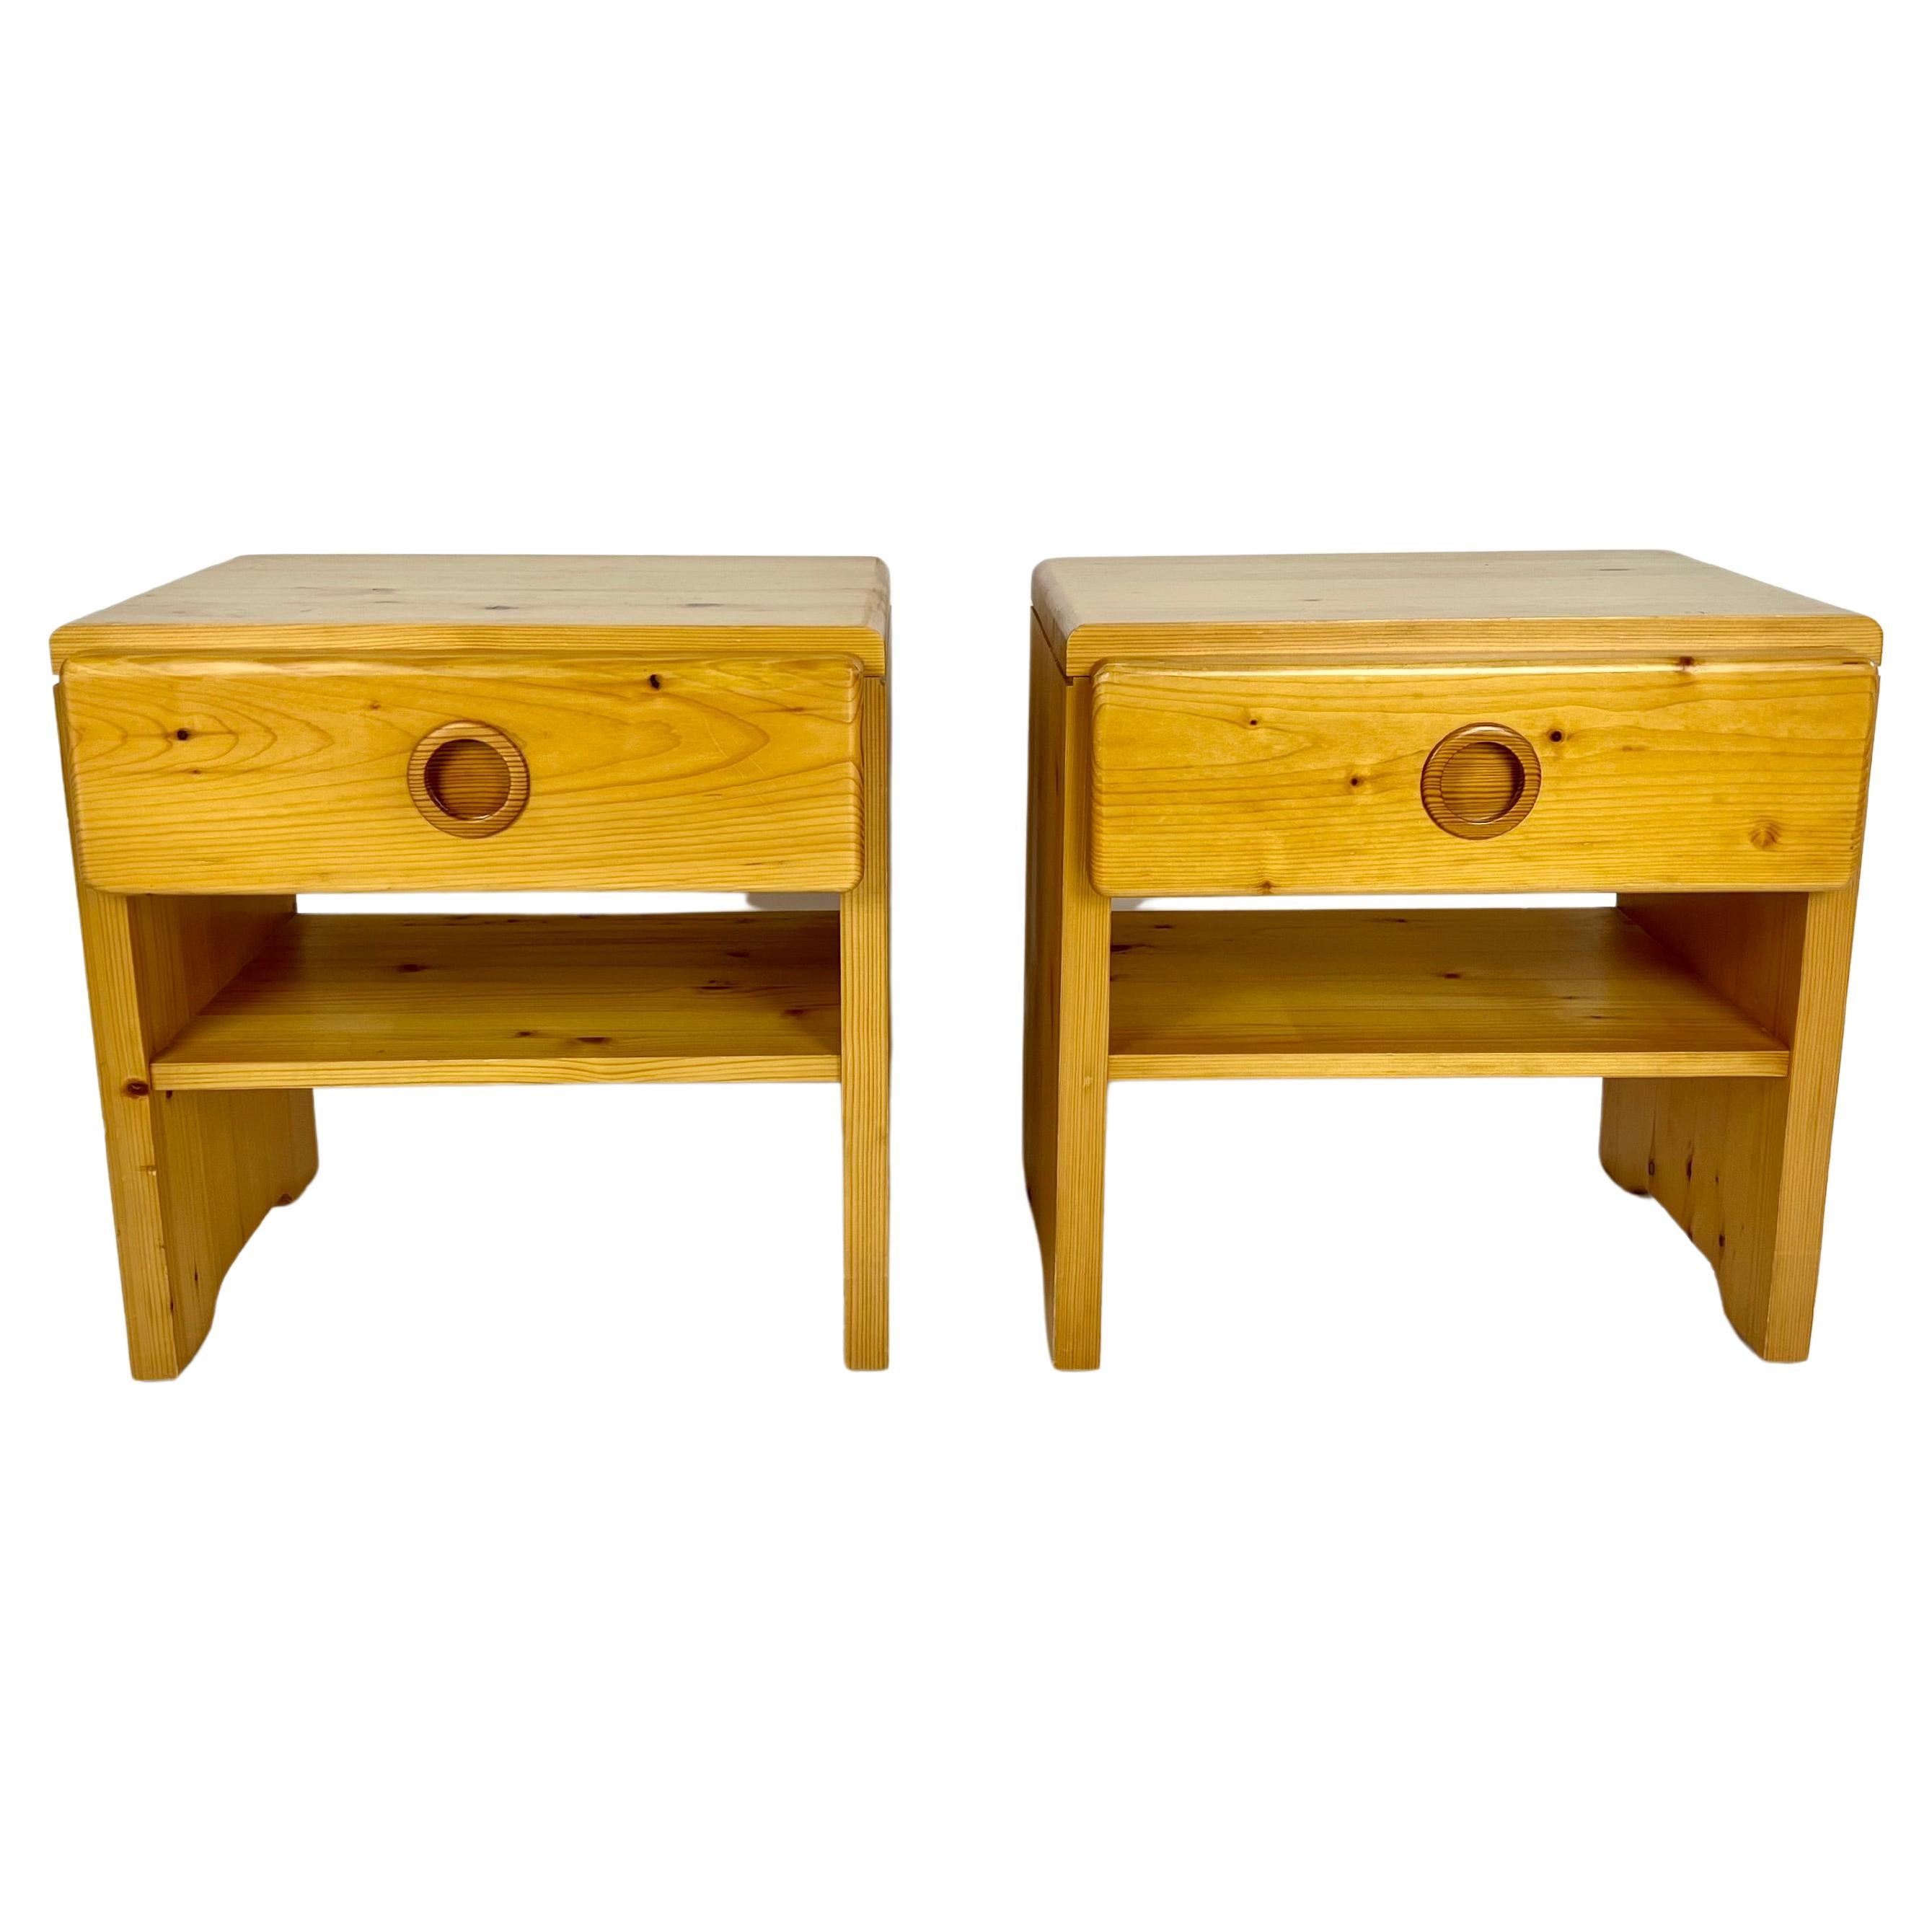 Pair of vintage pine bedside tables from Les Arcs, France. Charlotte Perriand